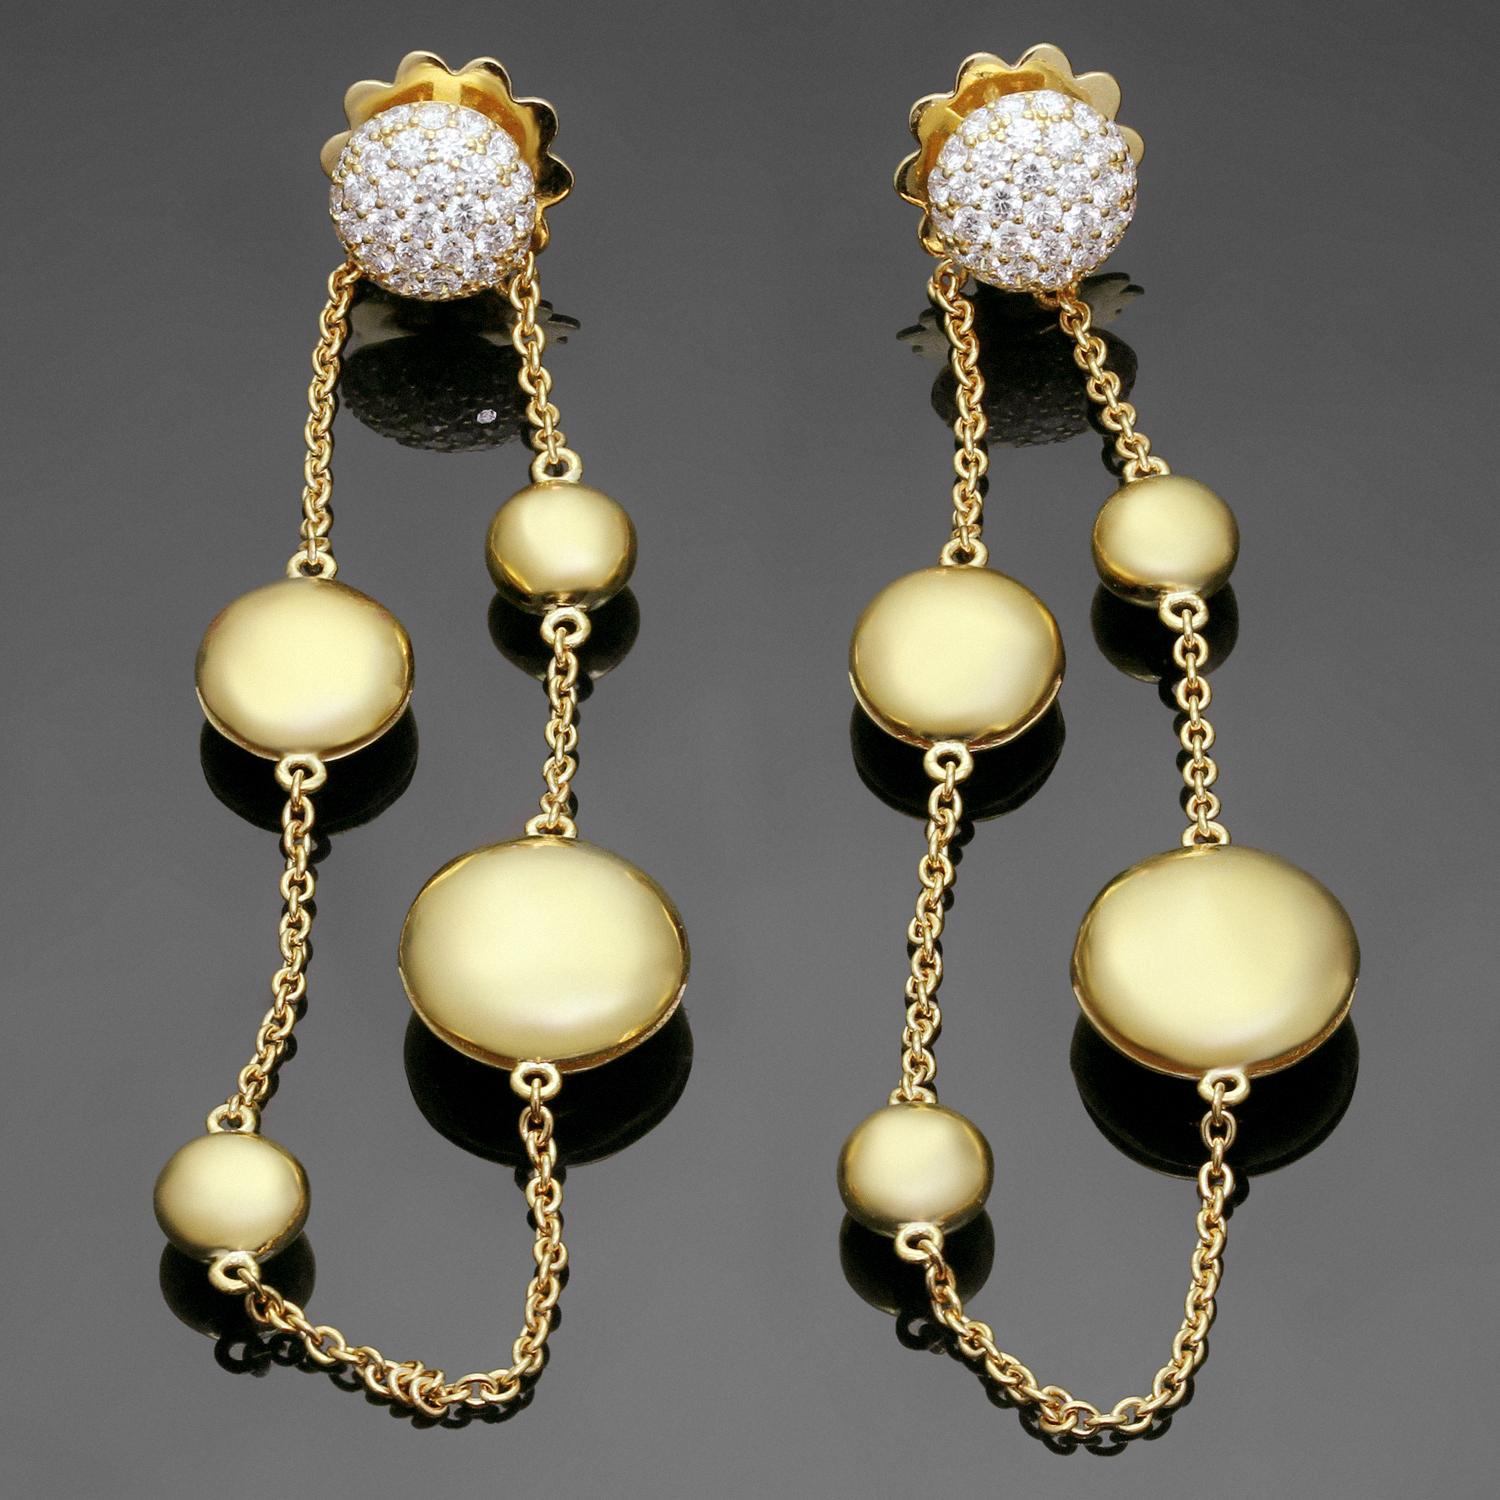 These stunning Robert Coin earrings are designed for pierced ears and feature a dangling chain design accented with round pebbles crafted in 18k yellow gold and set with full-cut diamonds weighing an estimated 0.75 carats. Stamped RC for Roberto